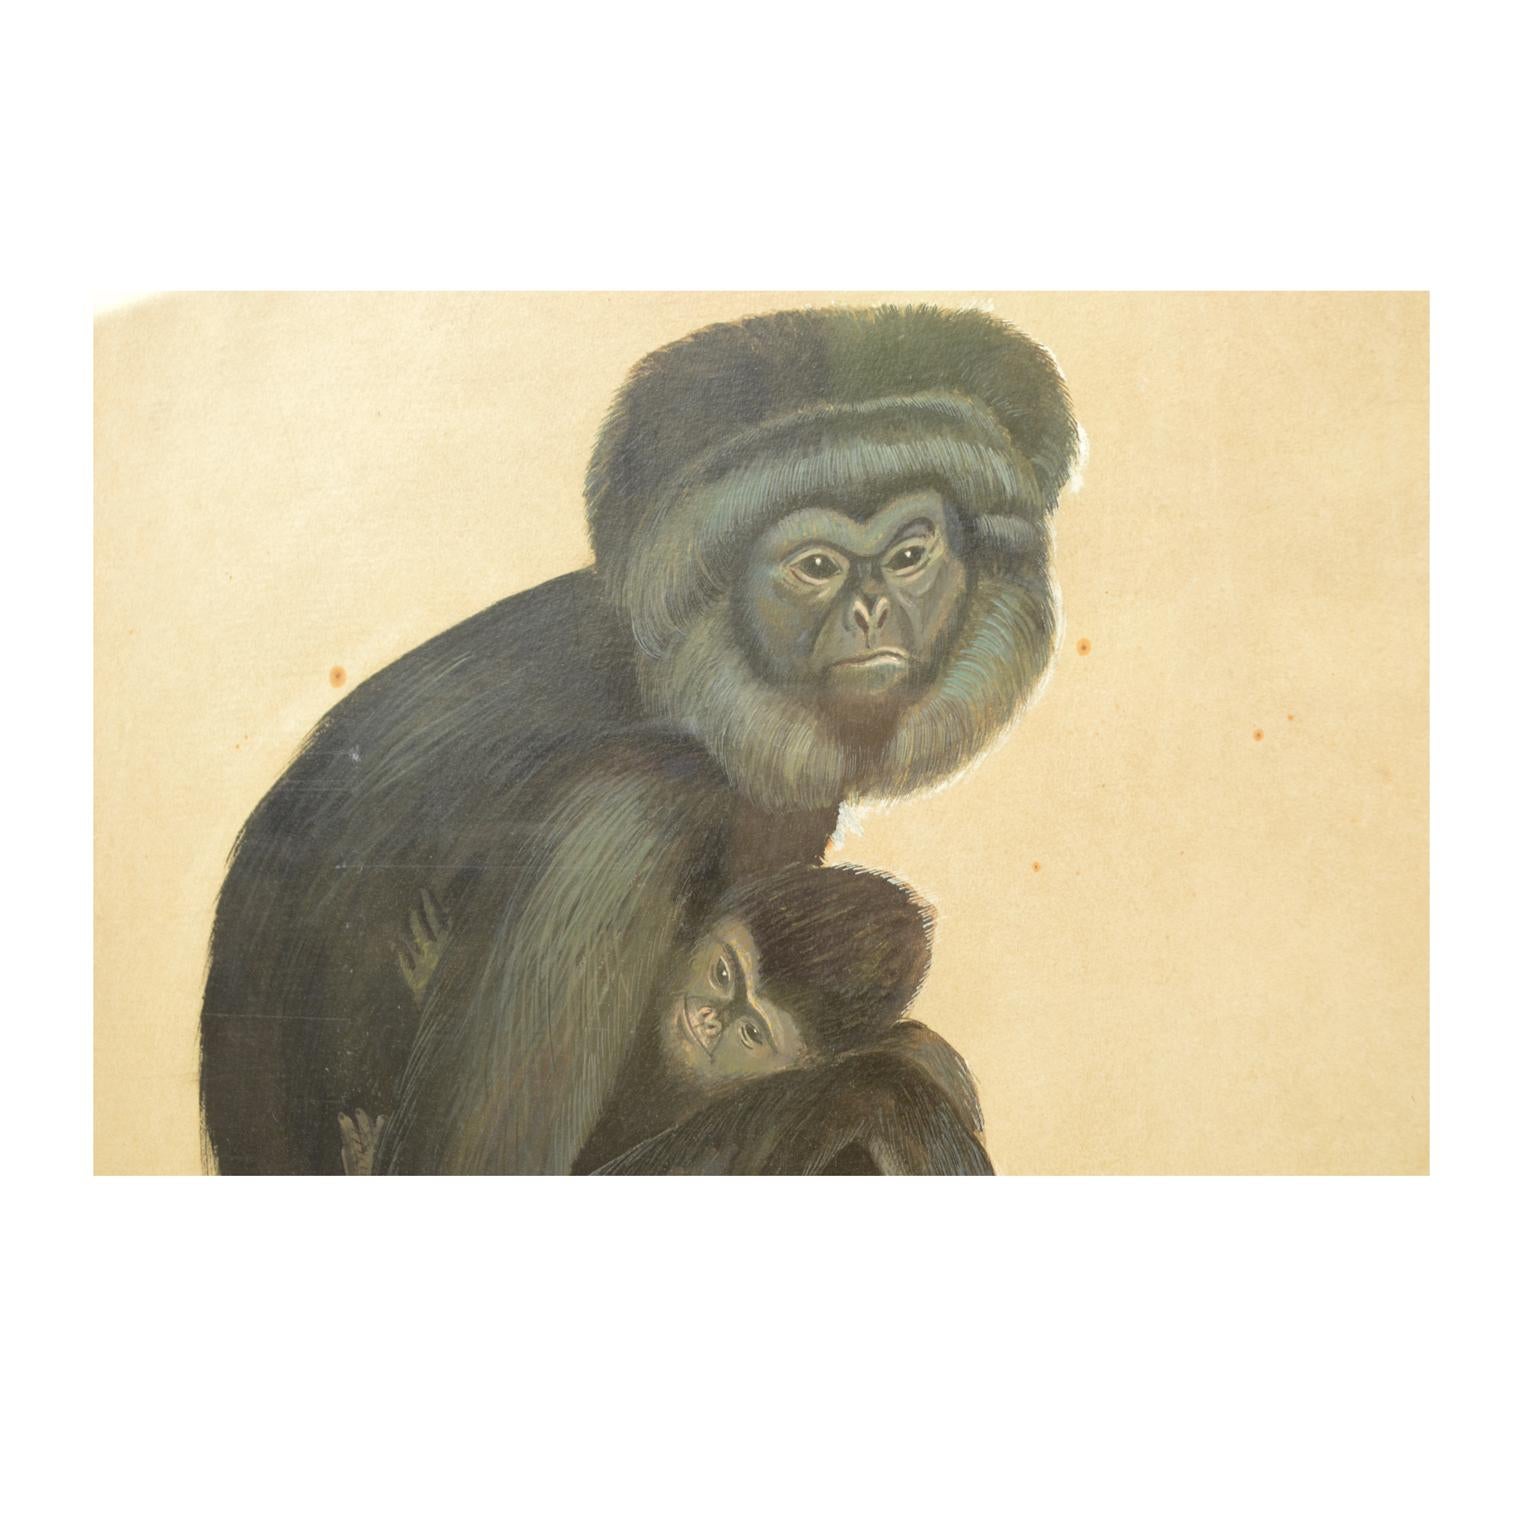 Korean Sketch of two gibbons Korea 1970s Acrylic on Paper for an Animals Encyclopedia For Sale